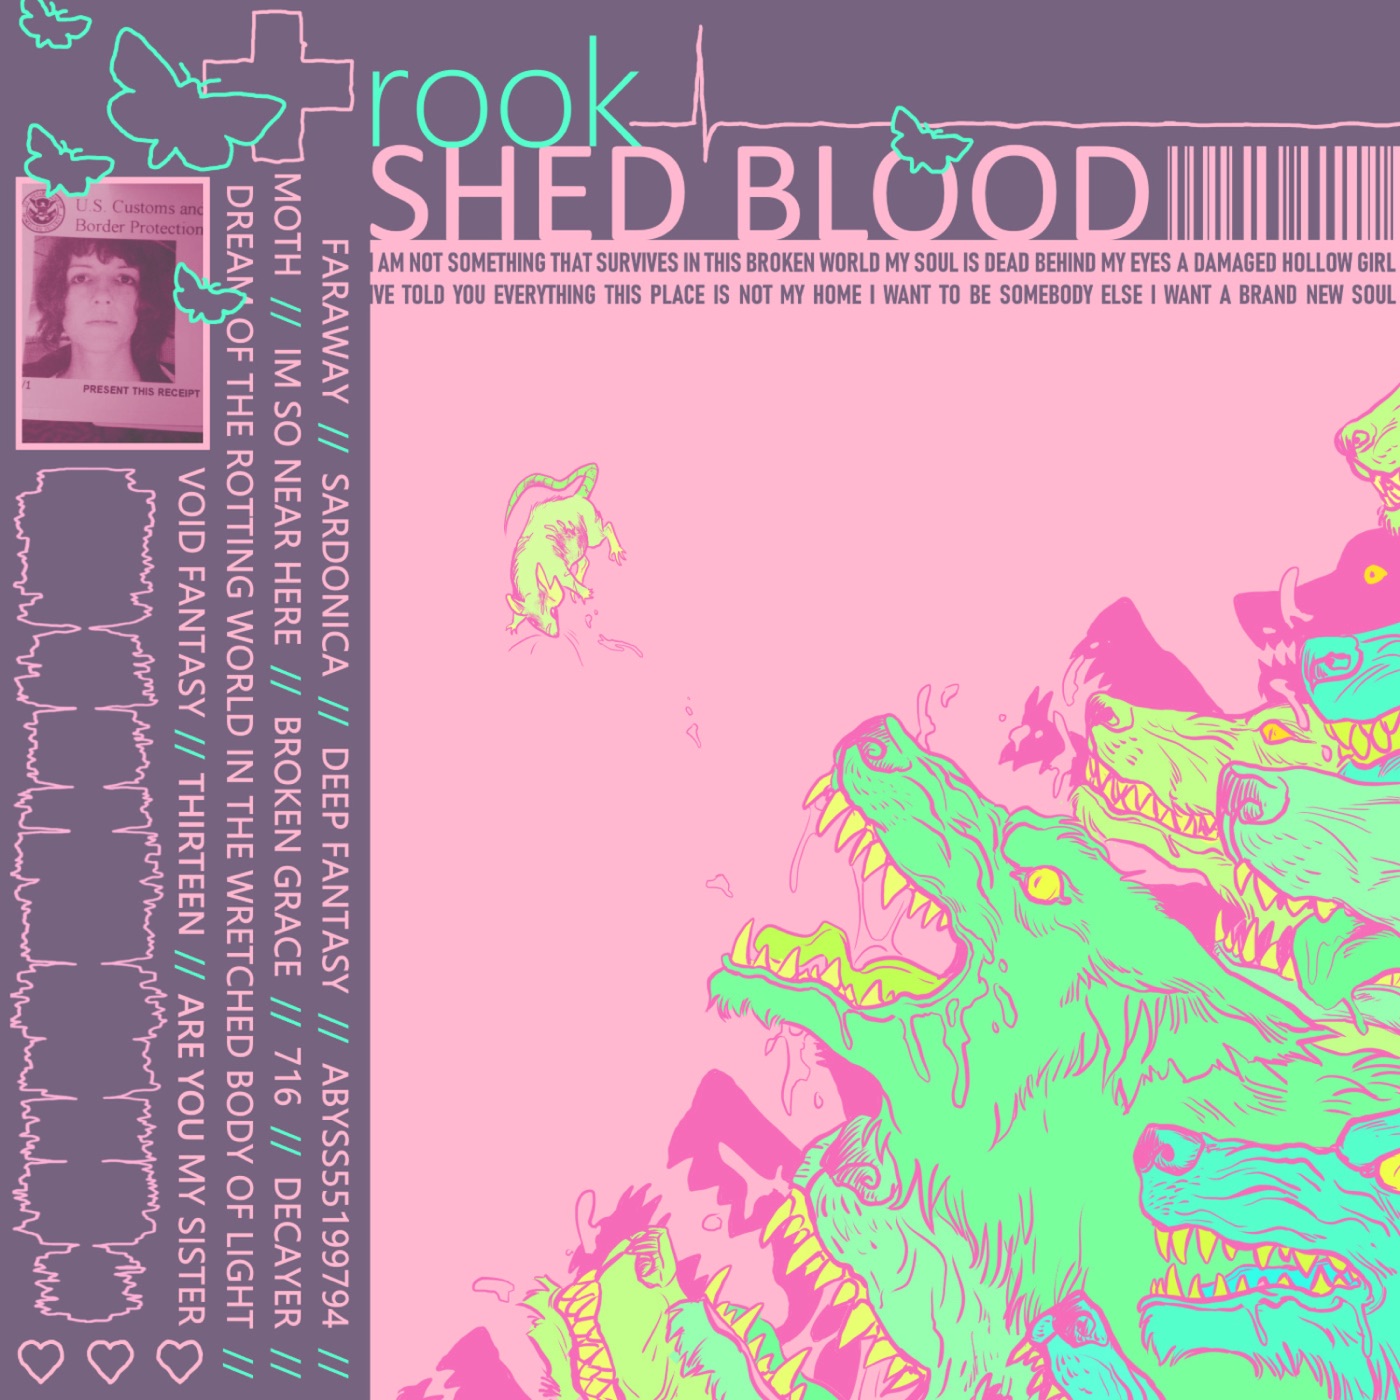 shed blood by Ada Rook